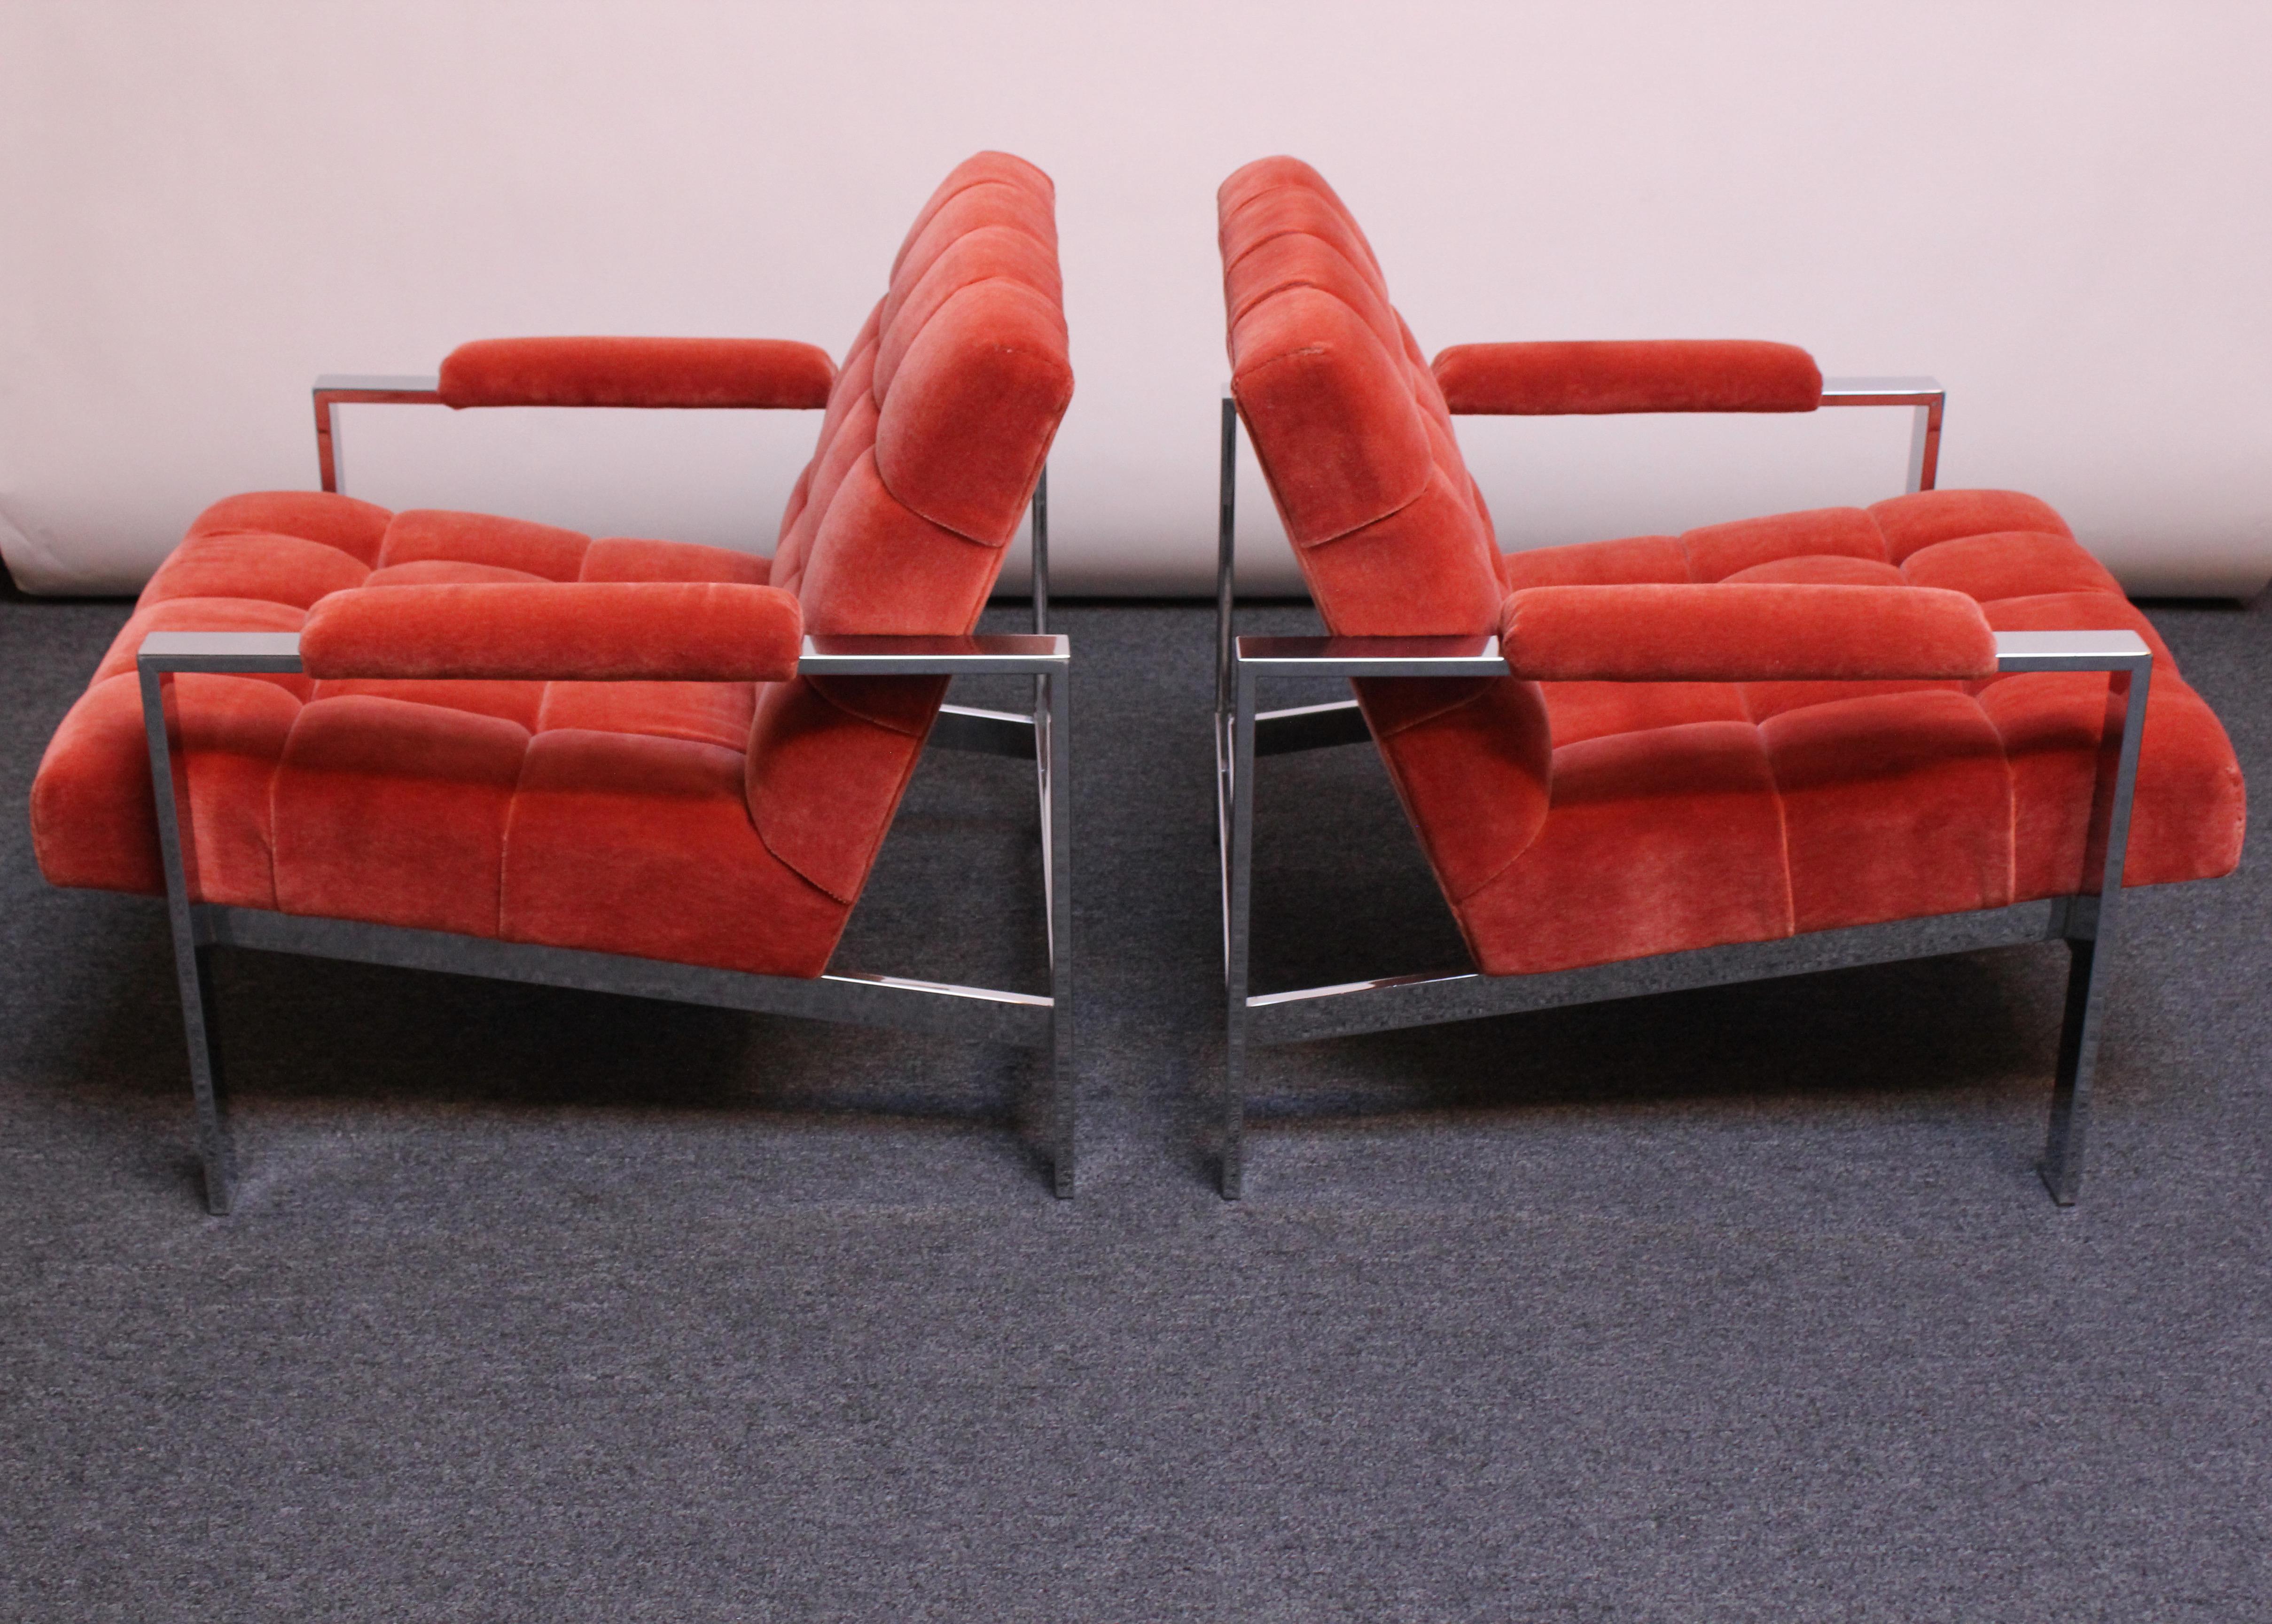 American Mid-Century Italian Modern Tufted Mohair and Chrome Lounge Chairs For Sale